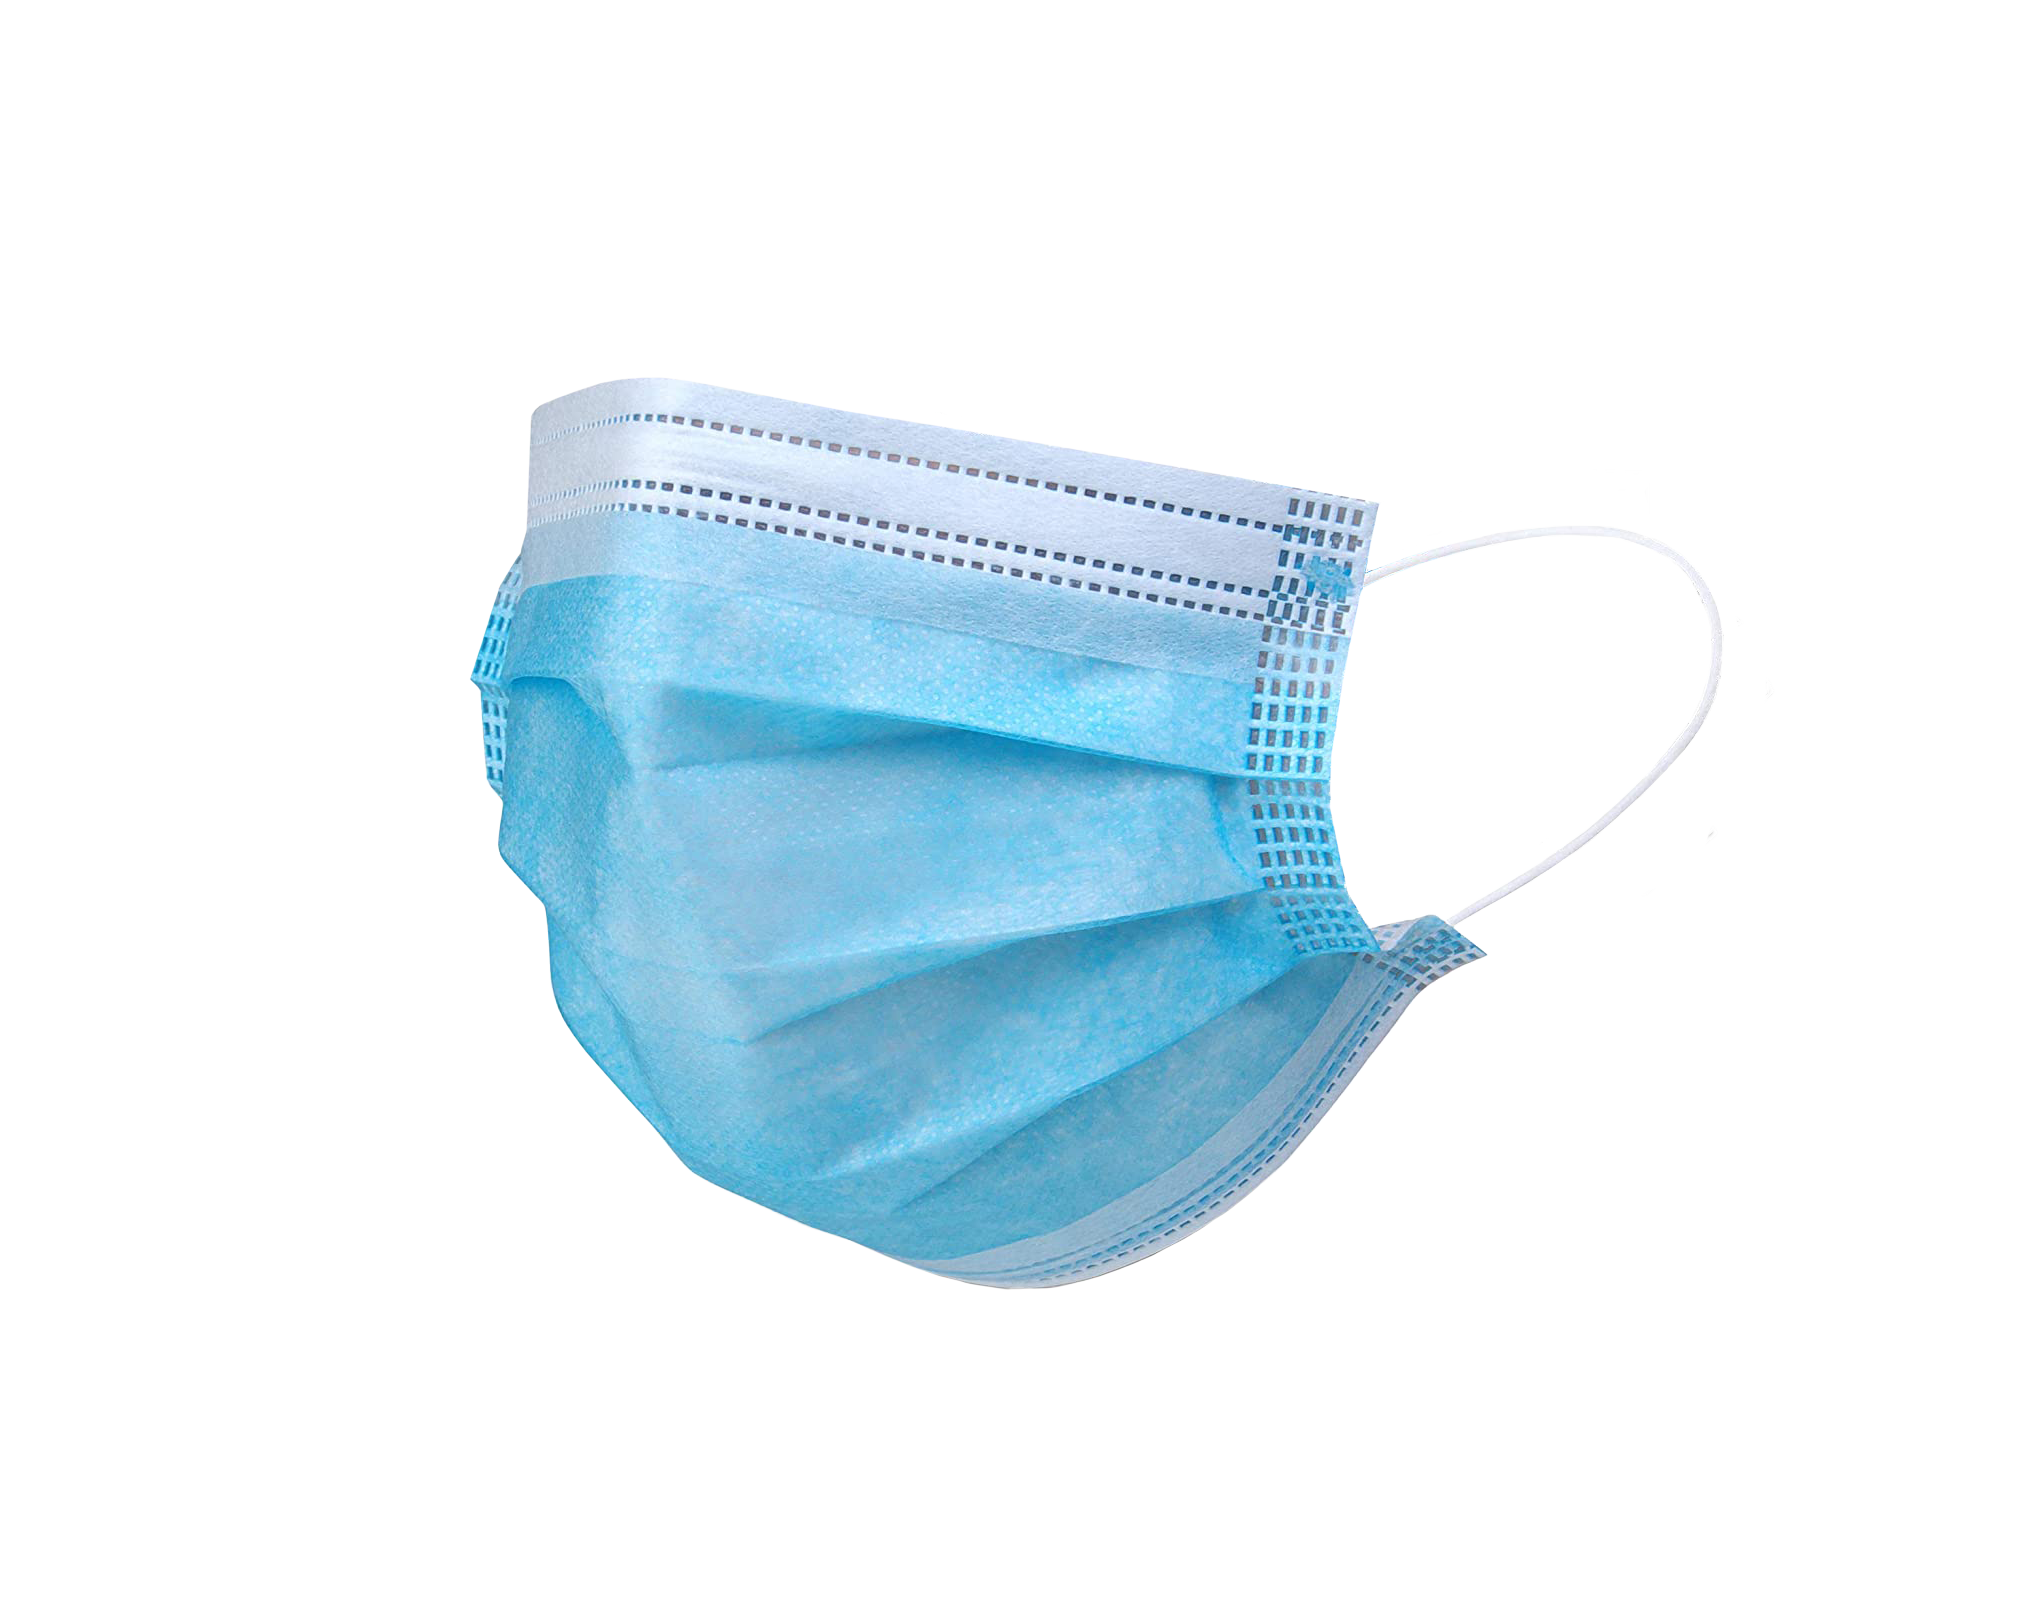 DISPOSABLE RESPIRATOR MASKS & DUST MASKS, HONEYWELL SAFETY PRODUCTS, Brands